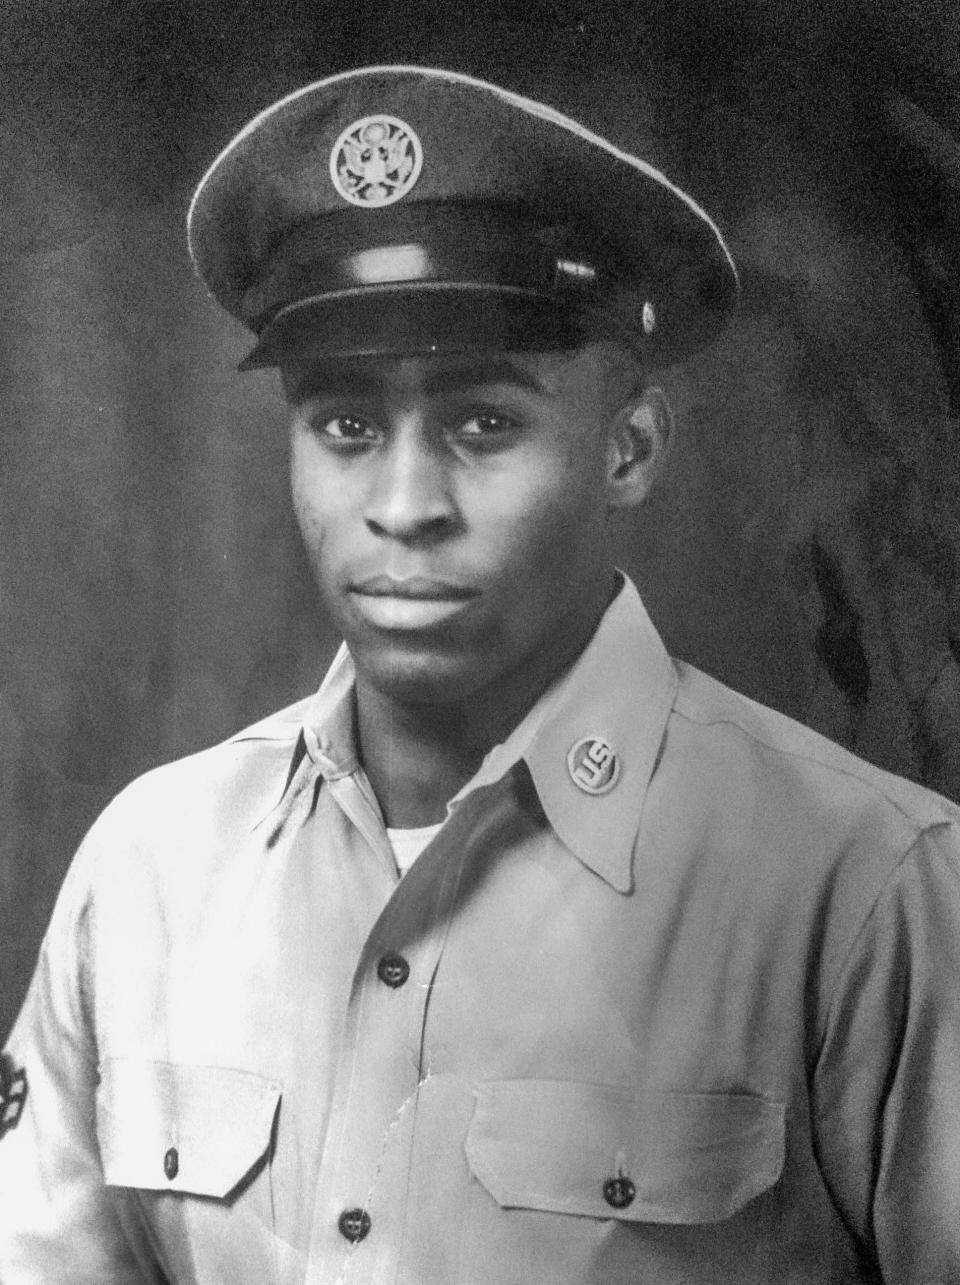 After graduating from Detroit's Eastern High School (Class of January 1952), Robert Bland served his country in the United States Air Force. During a period of time when Bland was stationed in Japan, he furthered his education by taking evening and weekend courses at Sophia University in Tokyo.